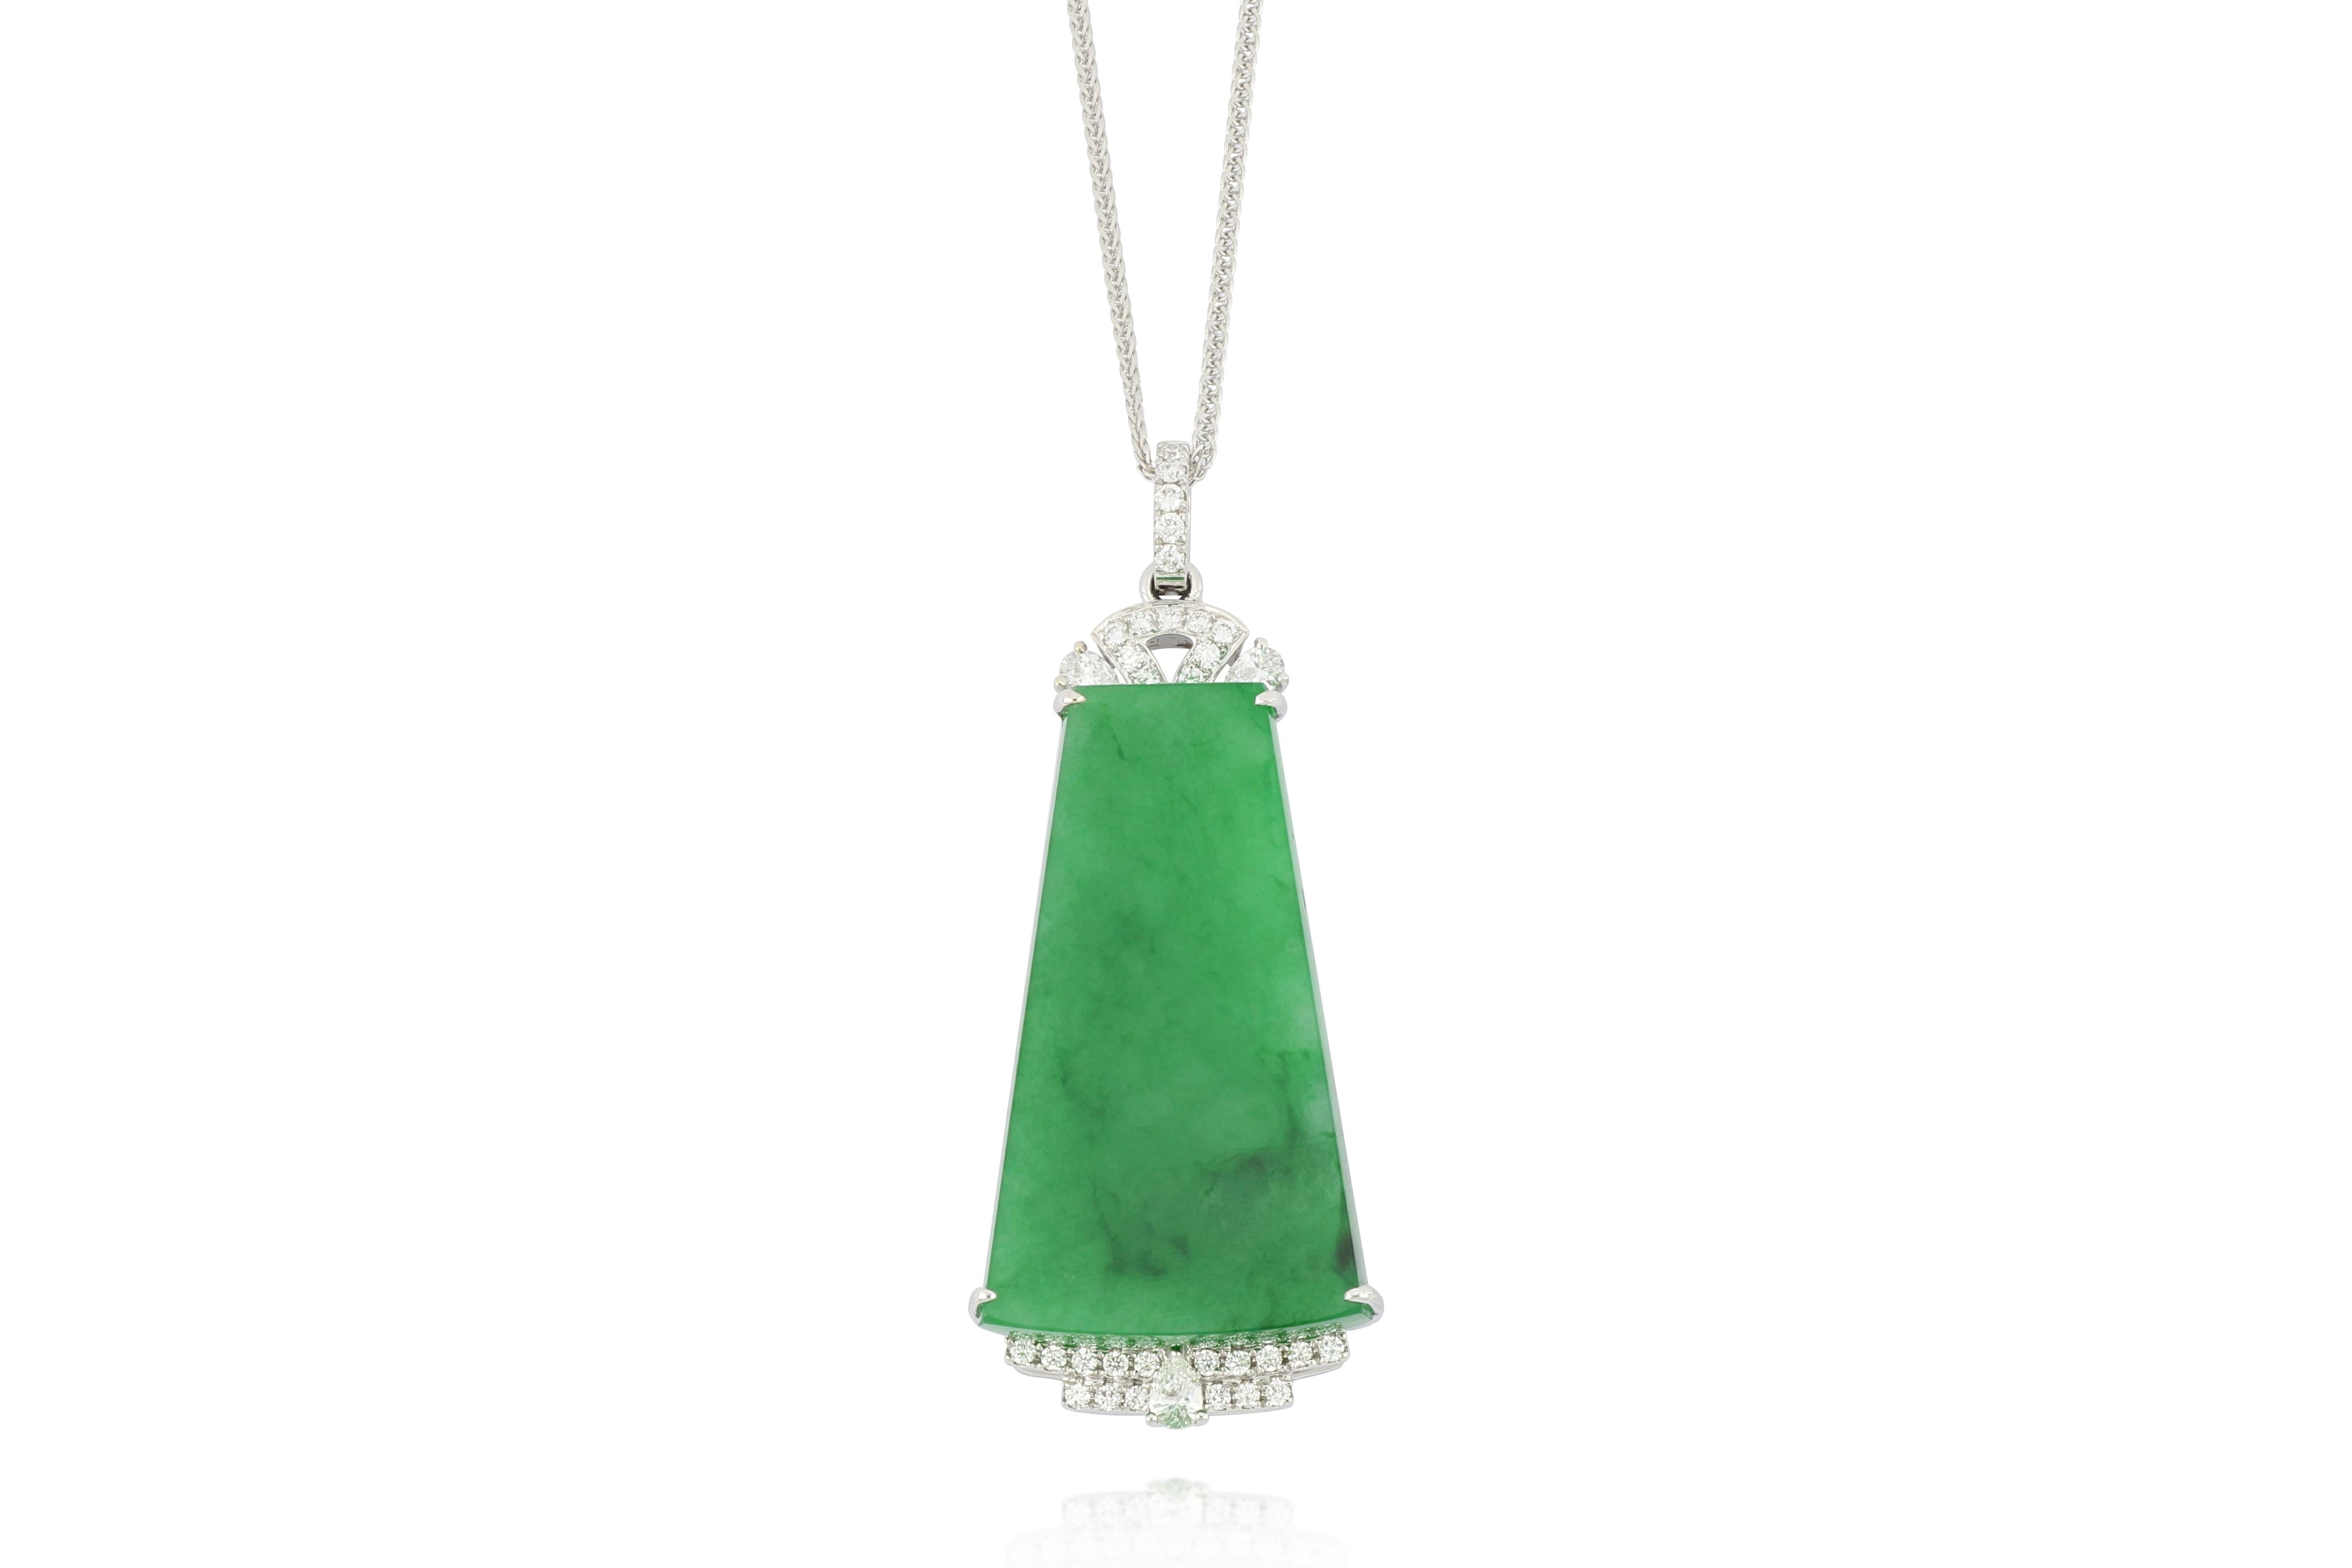 A highly translucent emerald green natural jadeite pendant in the shape of trapezium, decorated with round brilliant-cut diamonds, weighing 0.43 carats in total, mounted in 18 karat white gold. Accompanied by report number FC06777 dated August 29,